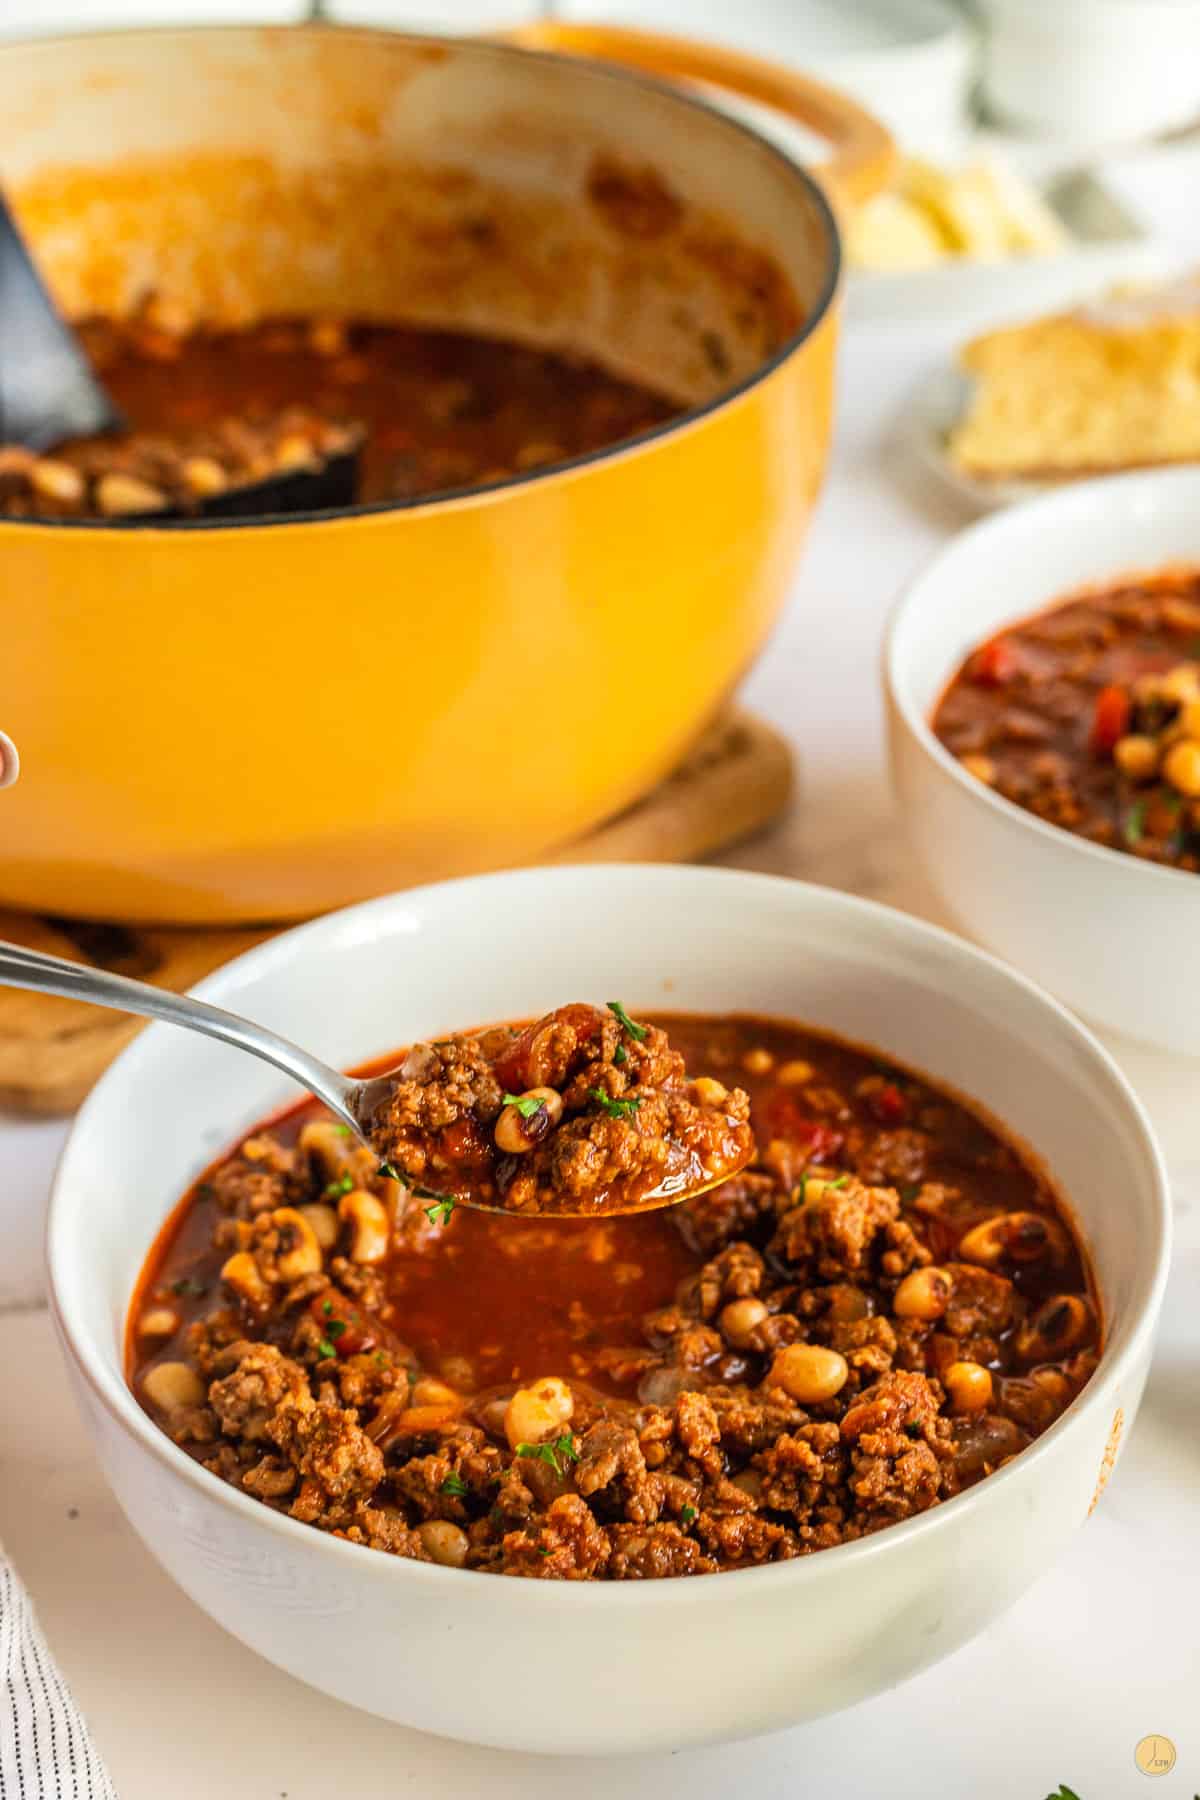 spoon of chili